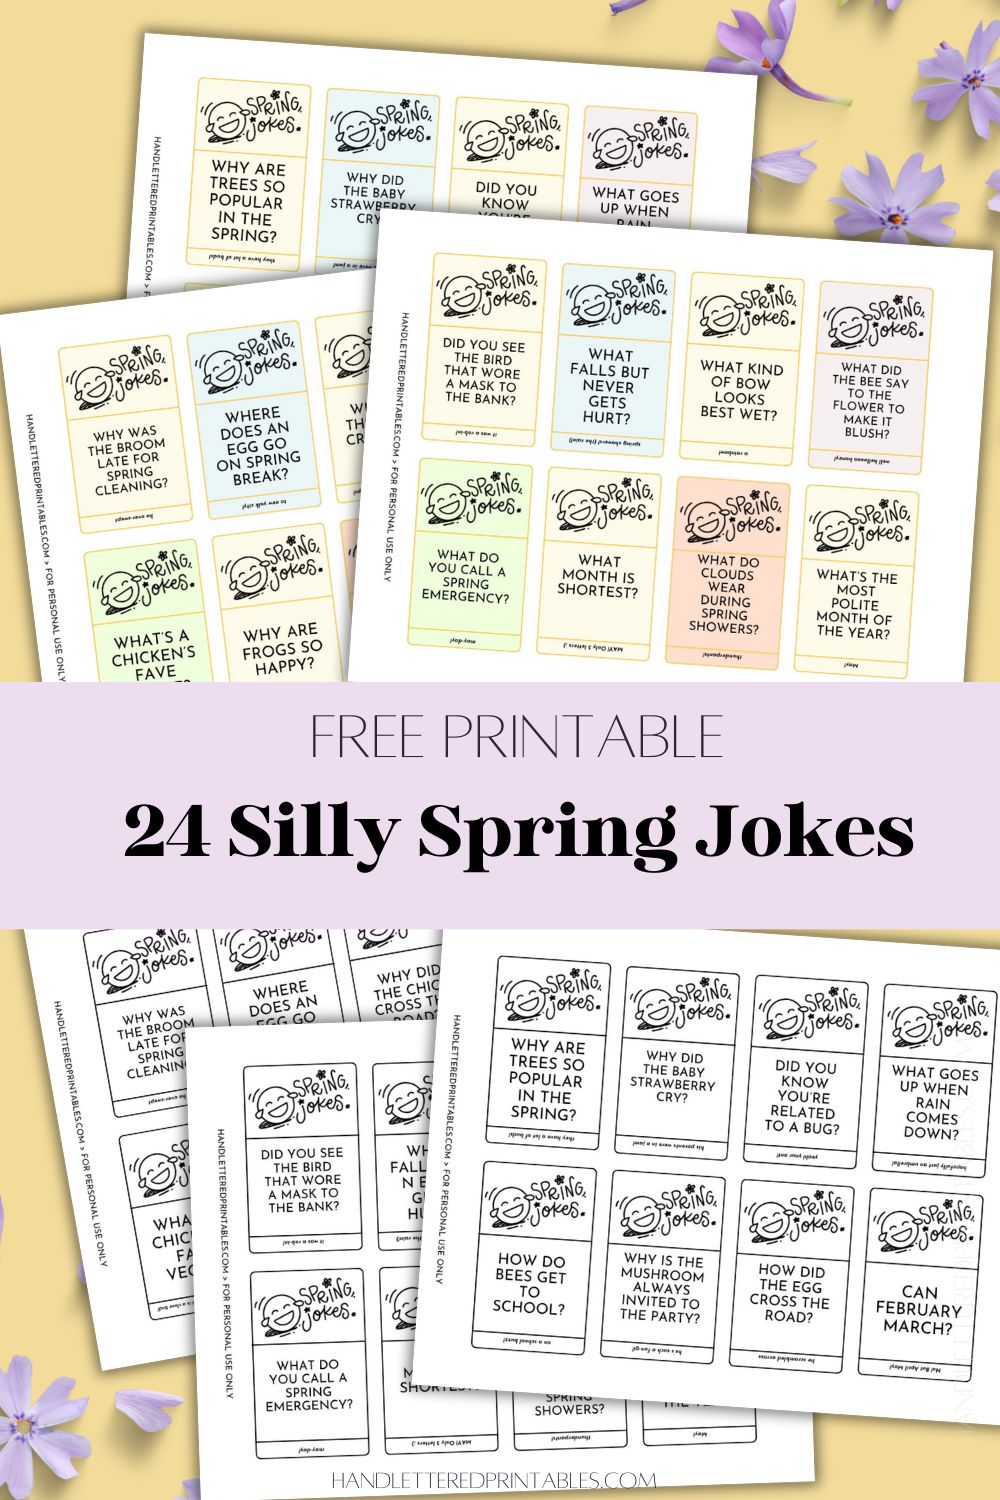 image of both color and black and white version of the spring jokes cards free printable printed on a pale yellow backdrop with purple flowers. joke cards feature a hand lettered title and illustrated laughing emoji with the jokes. text over reads: free printable 24 silly spring jokes